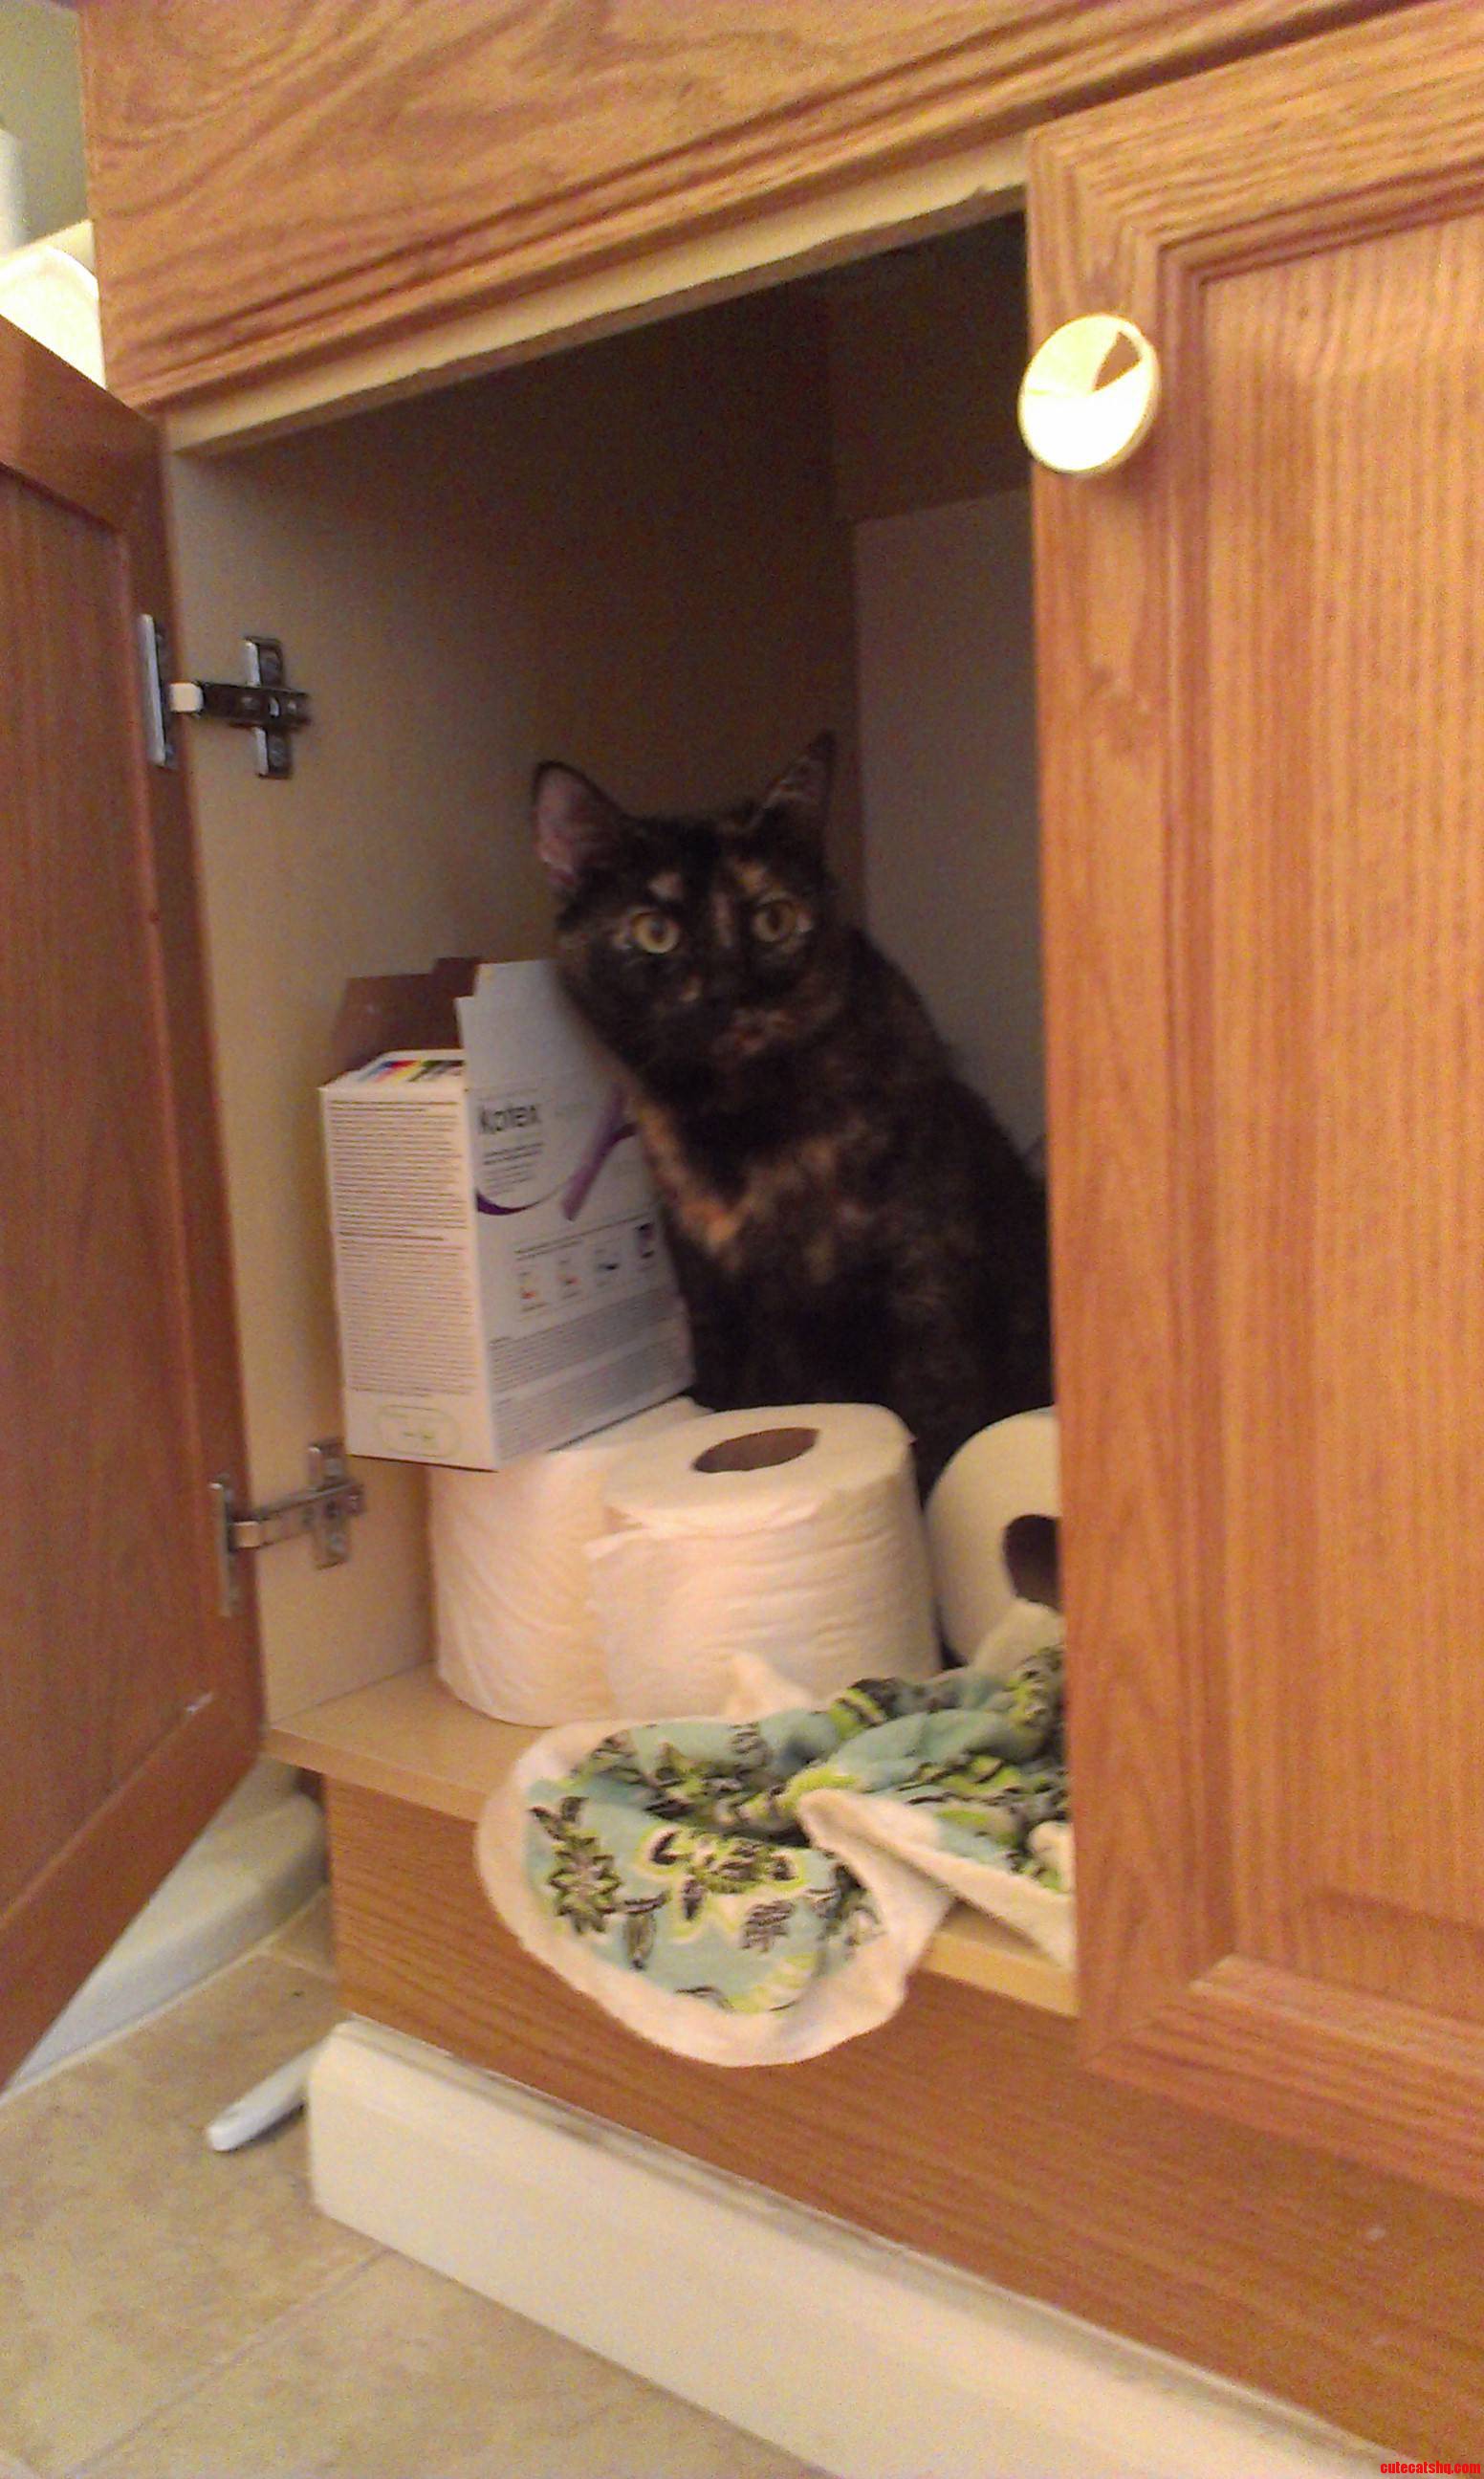 Heard Some Clunking Around In The Bathroom  Opened The Cupboard To Find My Cat Building A Fort.